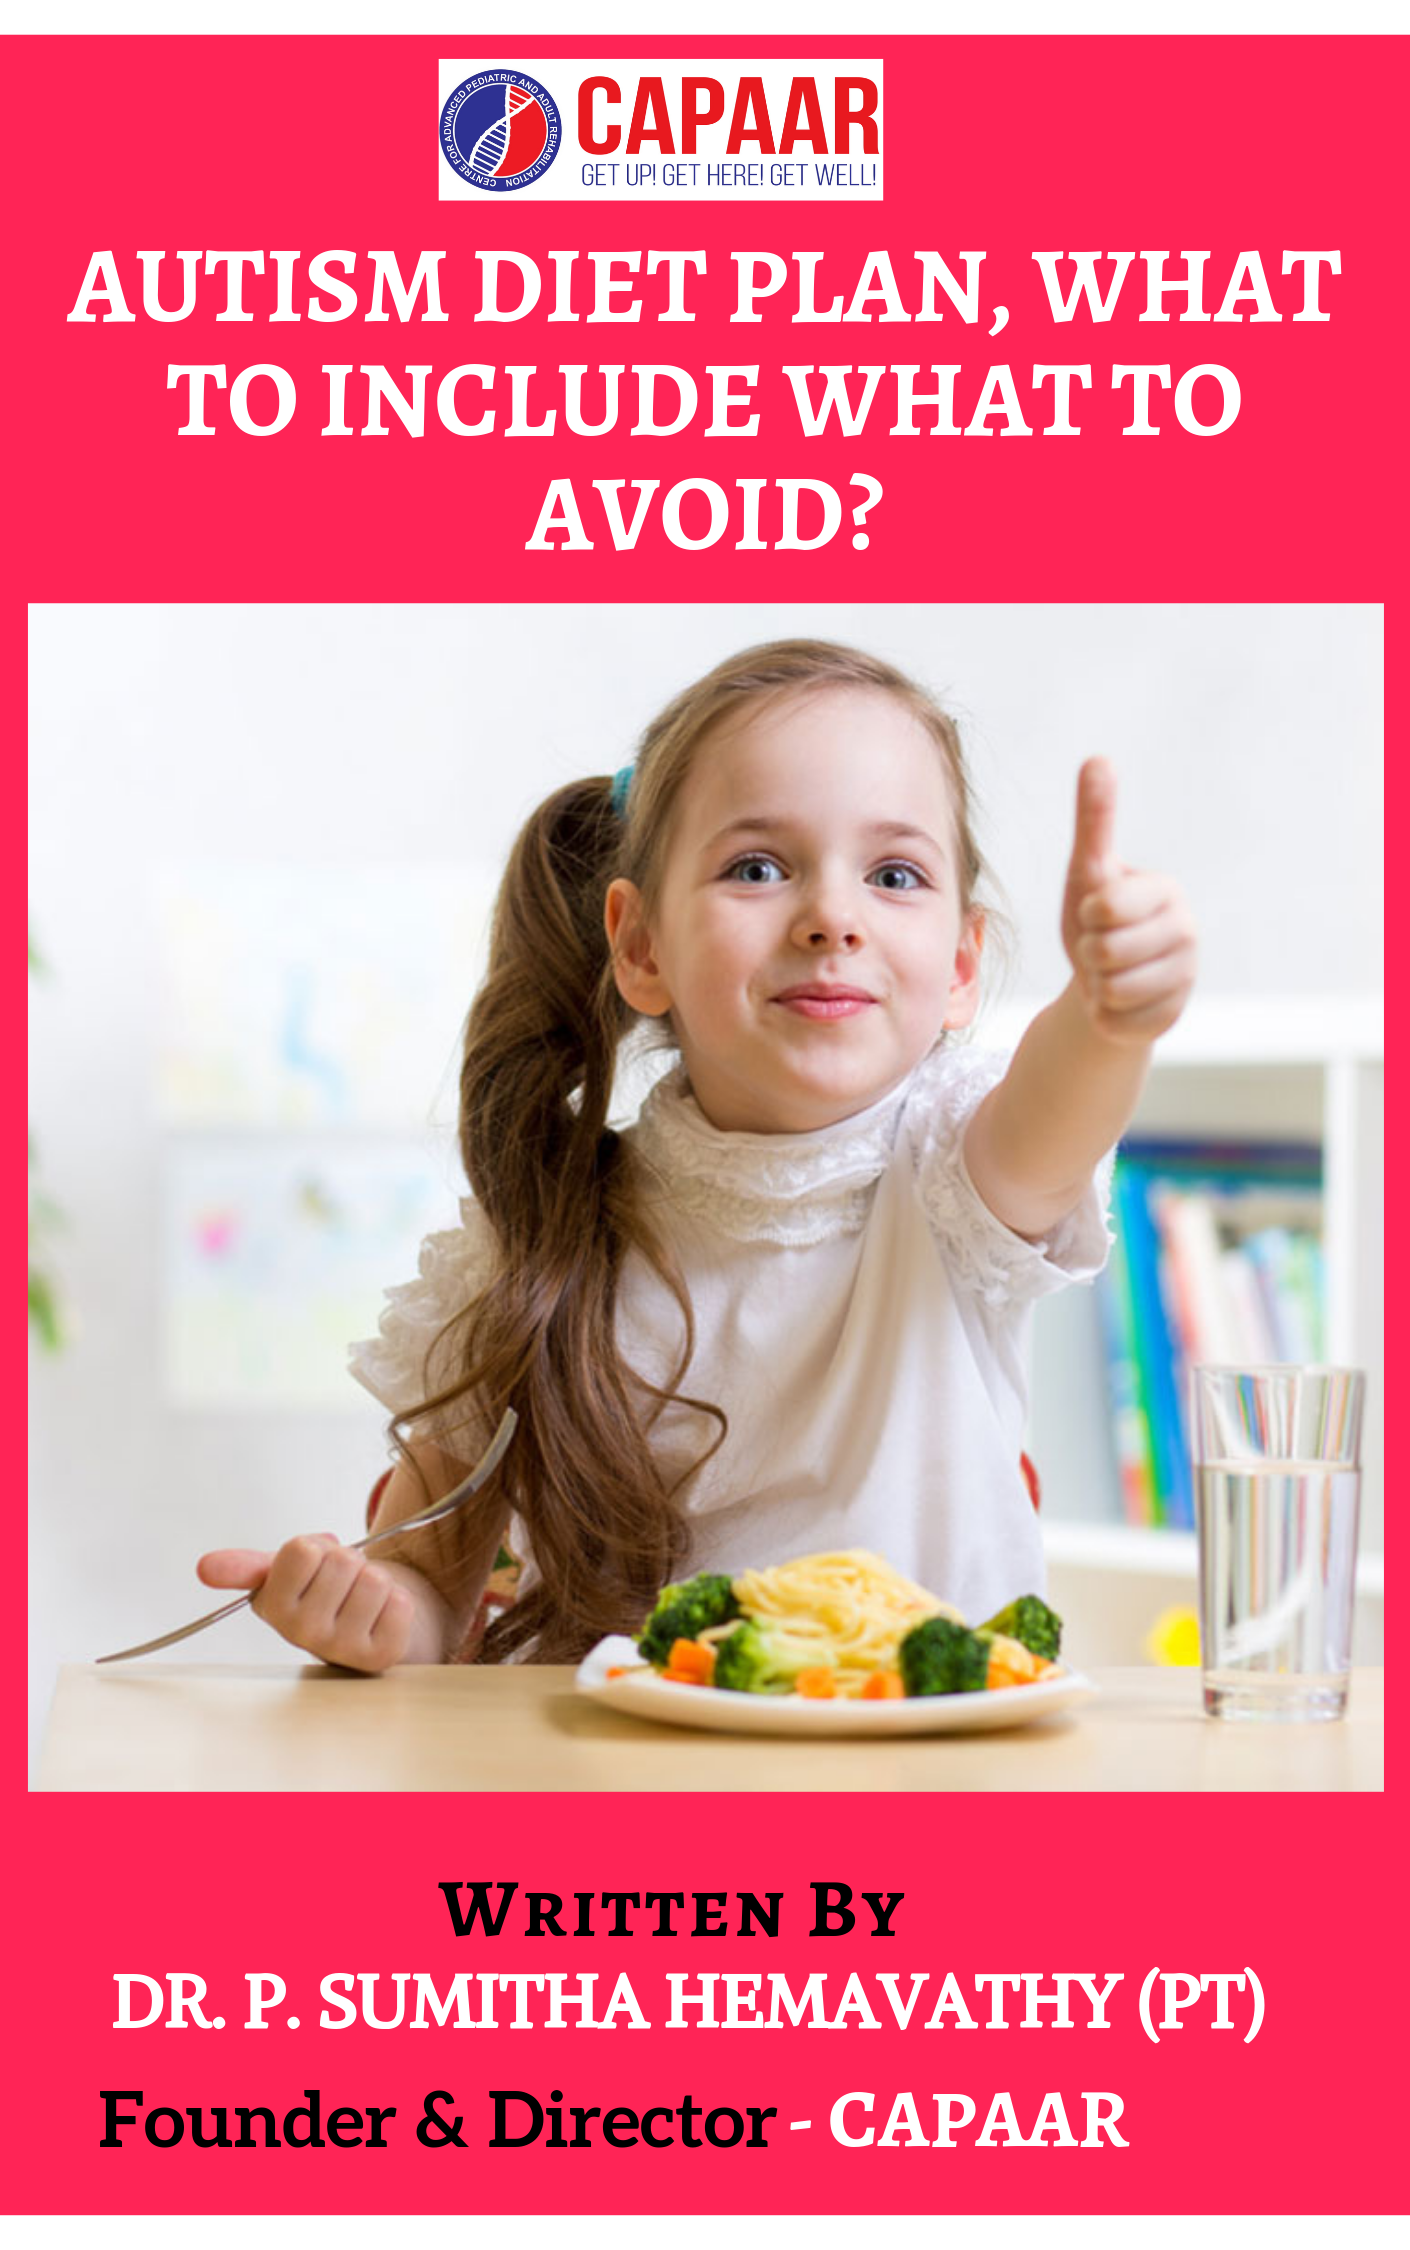 Autism diet plan, what to include what to avoid_